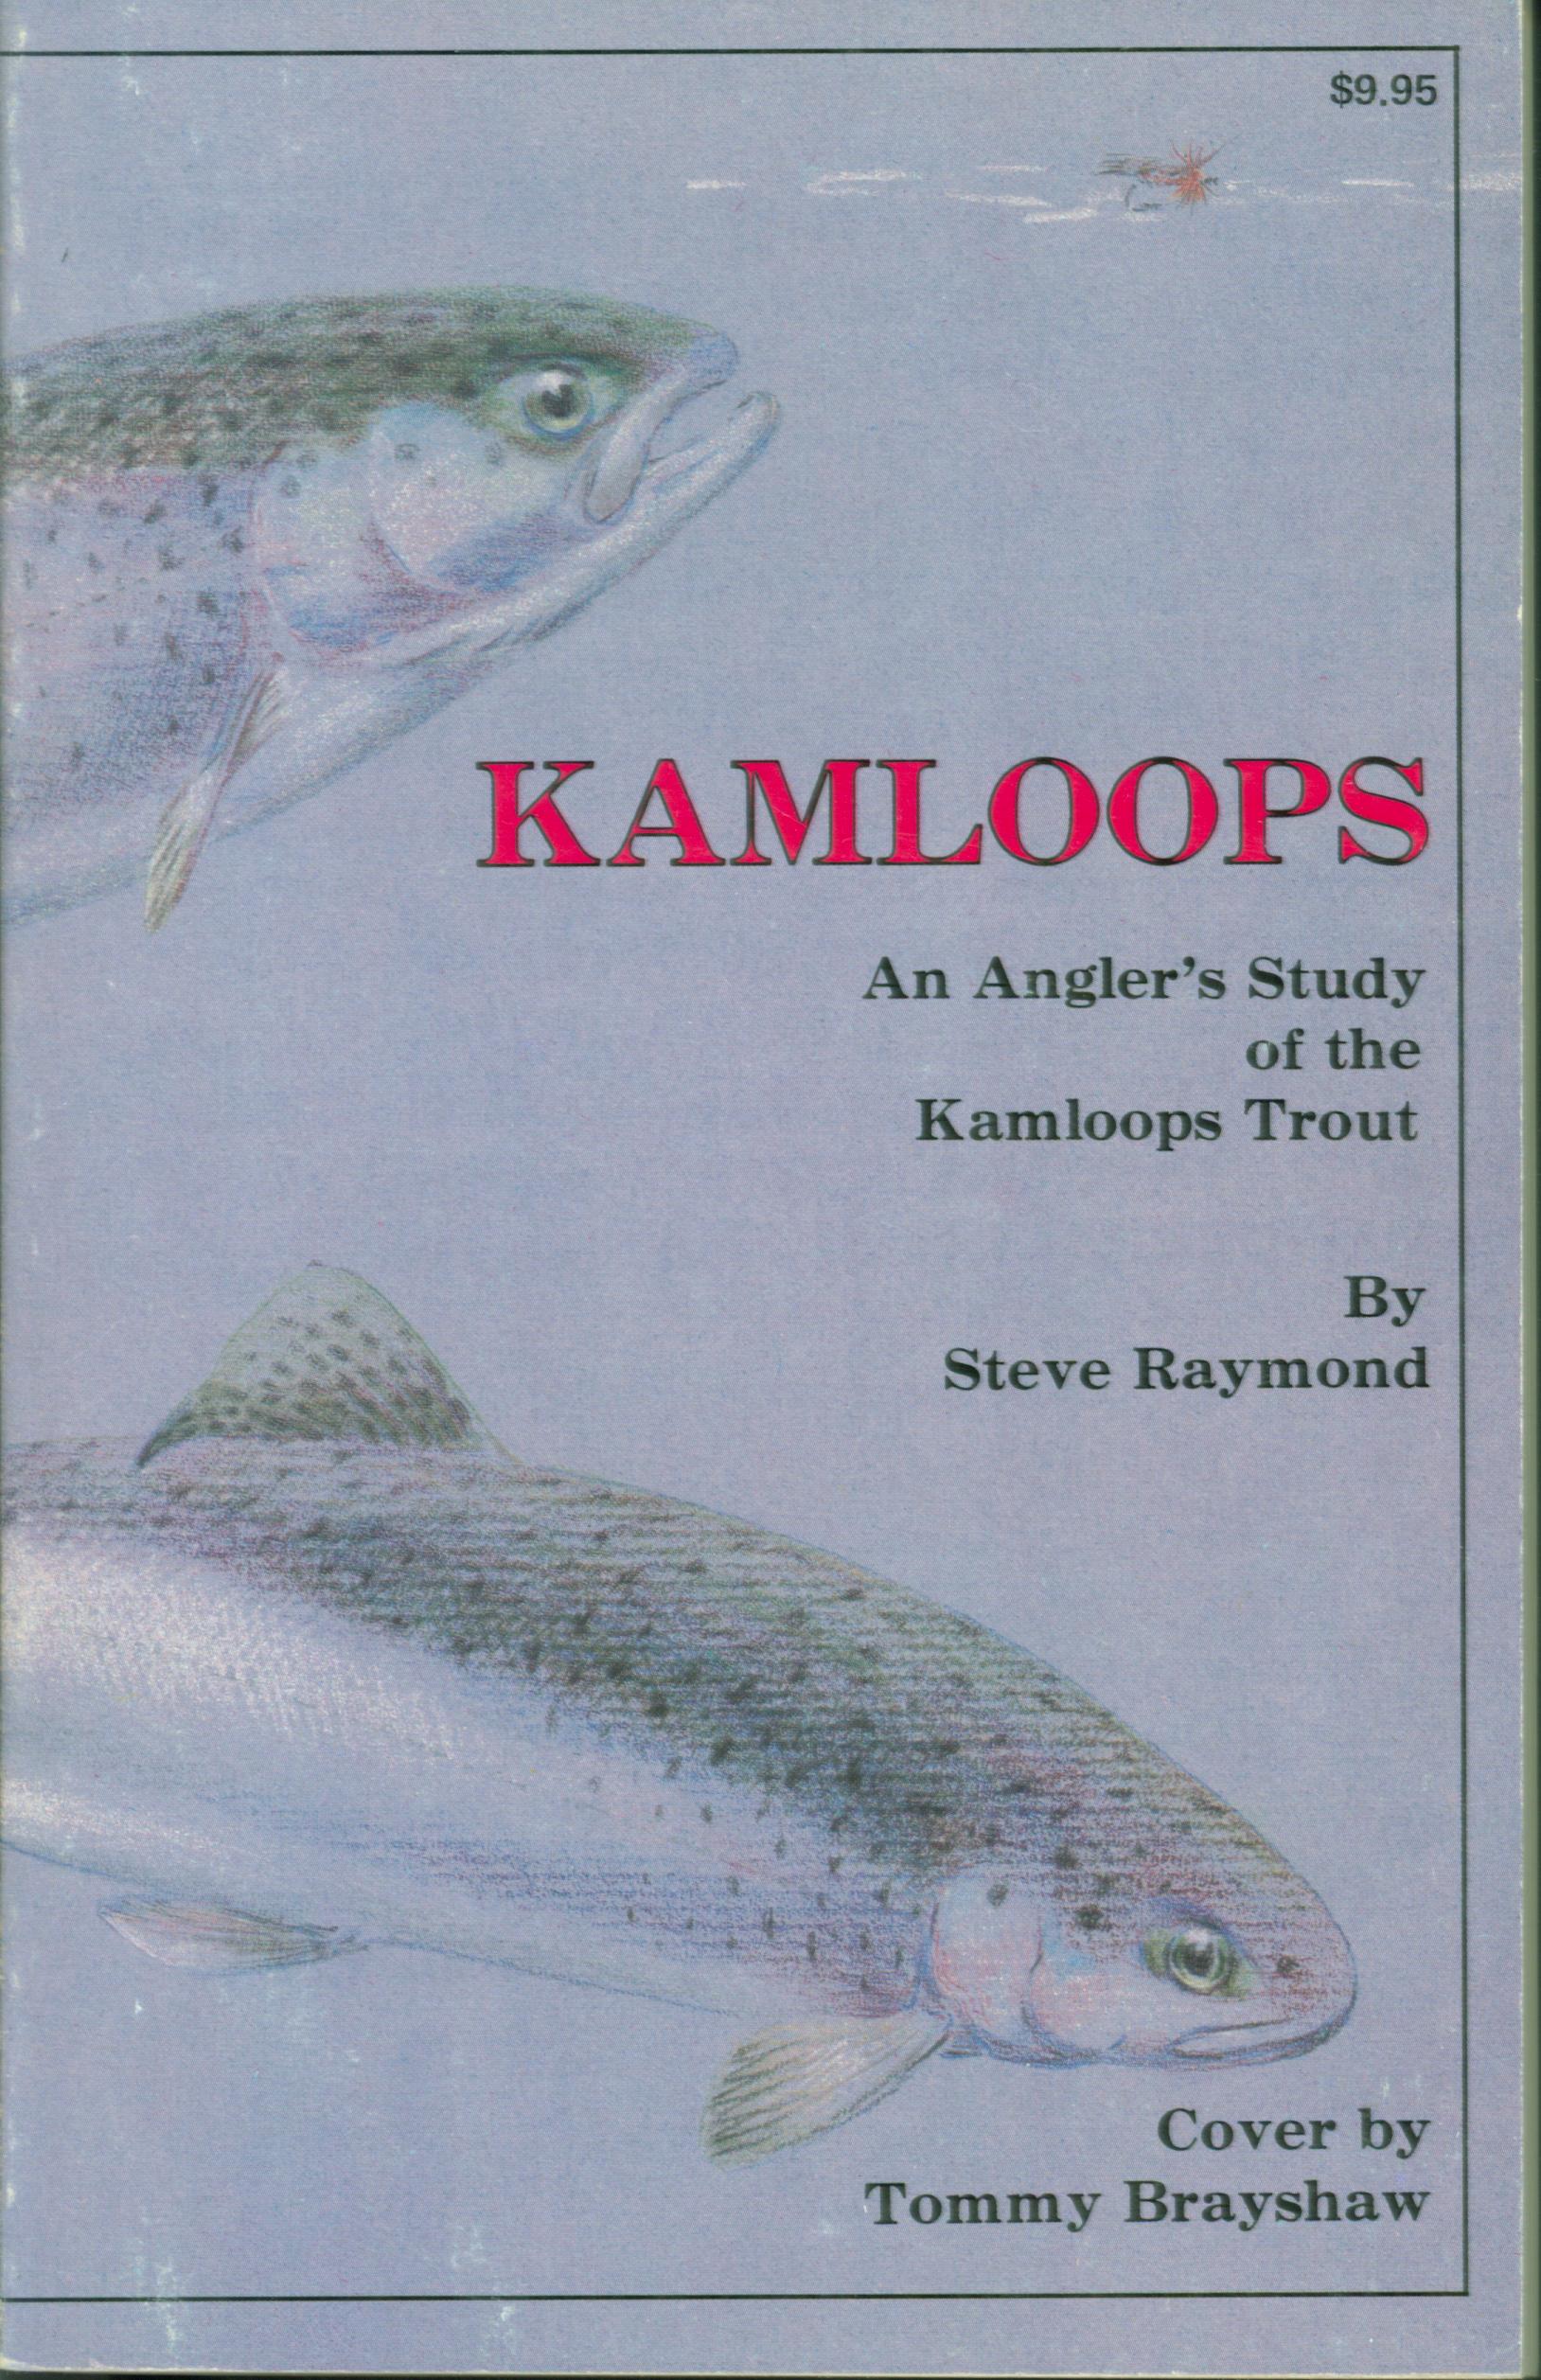 KAMLOOPS--an angler's study of the Kamloops trout. 